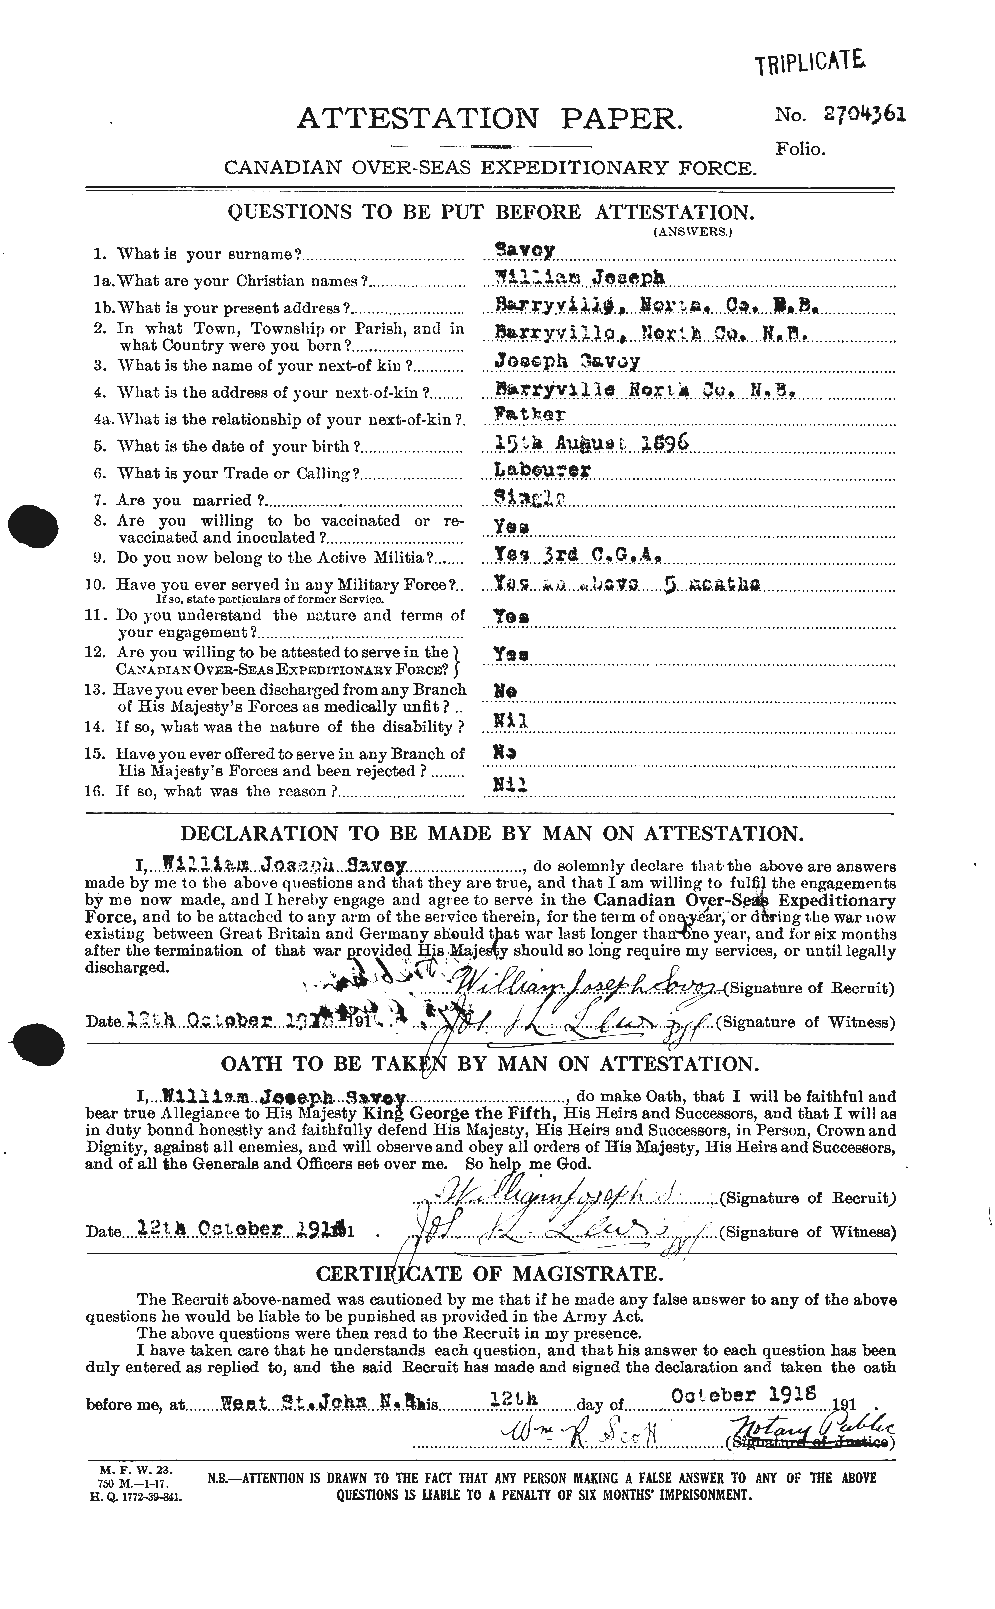 Personnel Records of the First World War - CEF 692005a